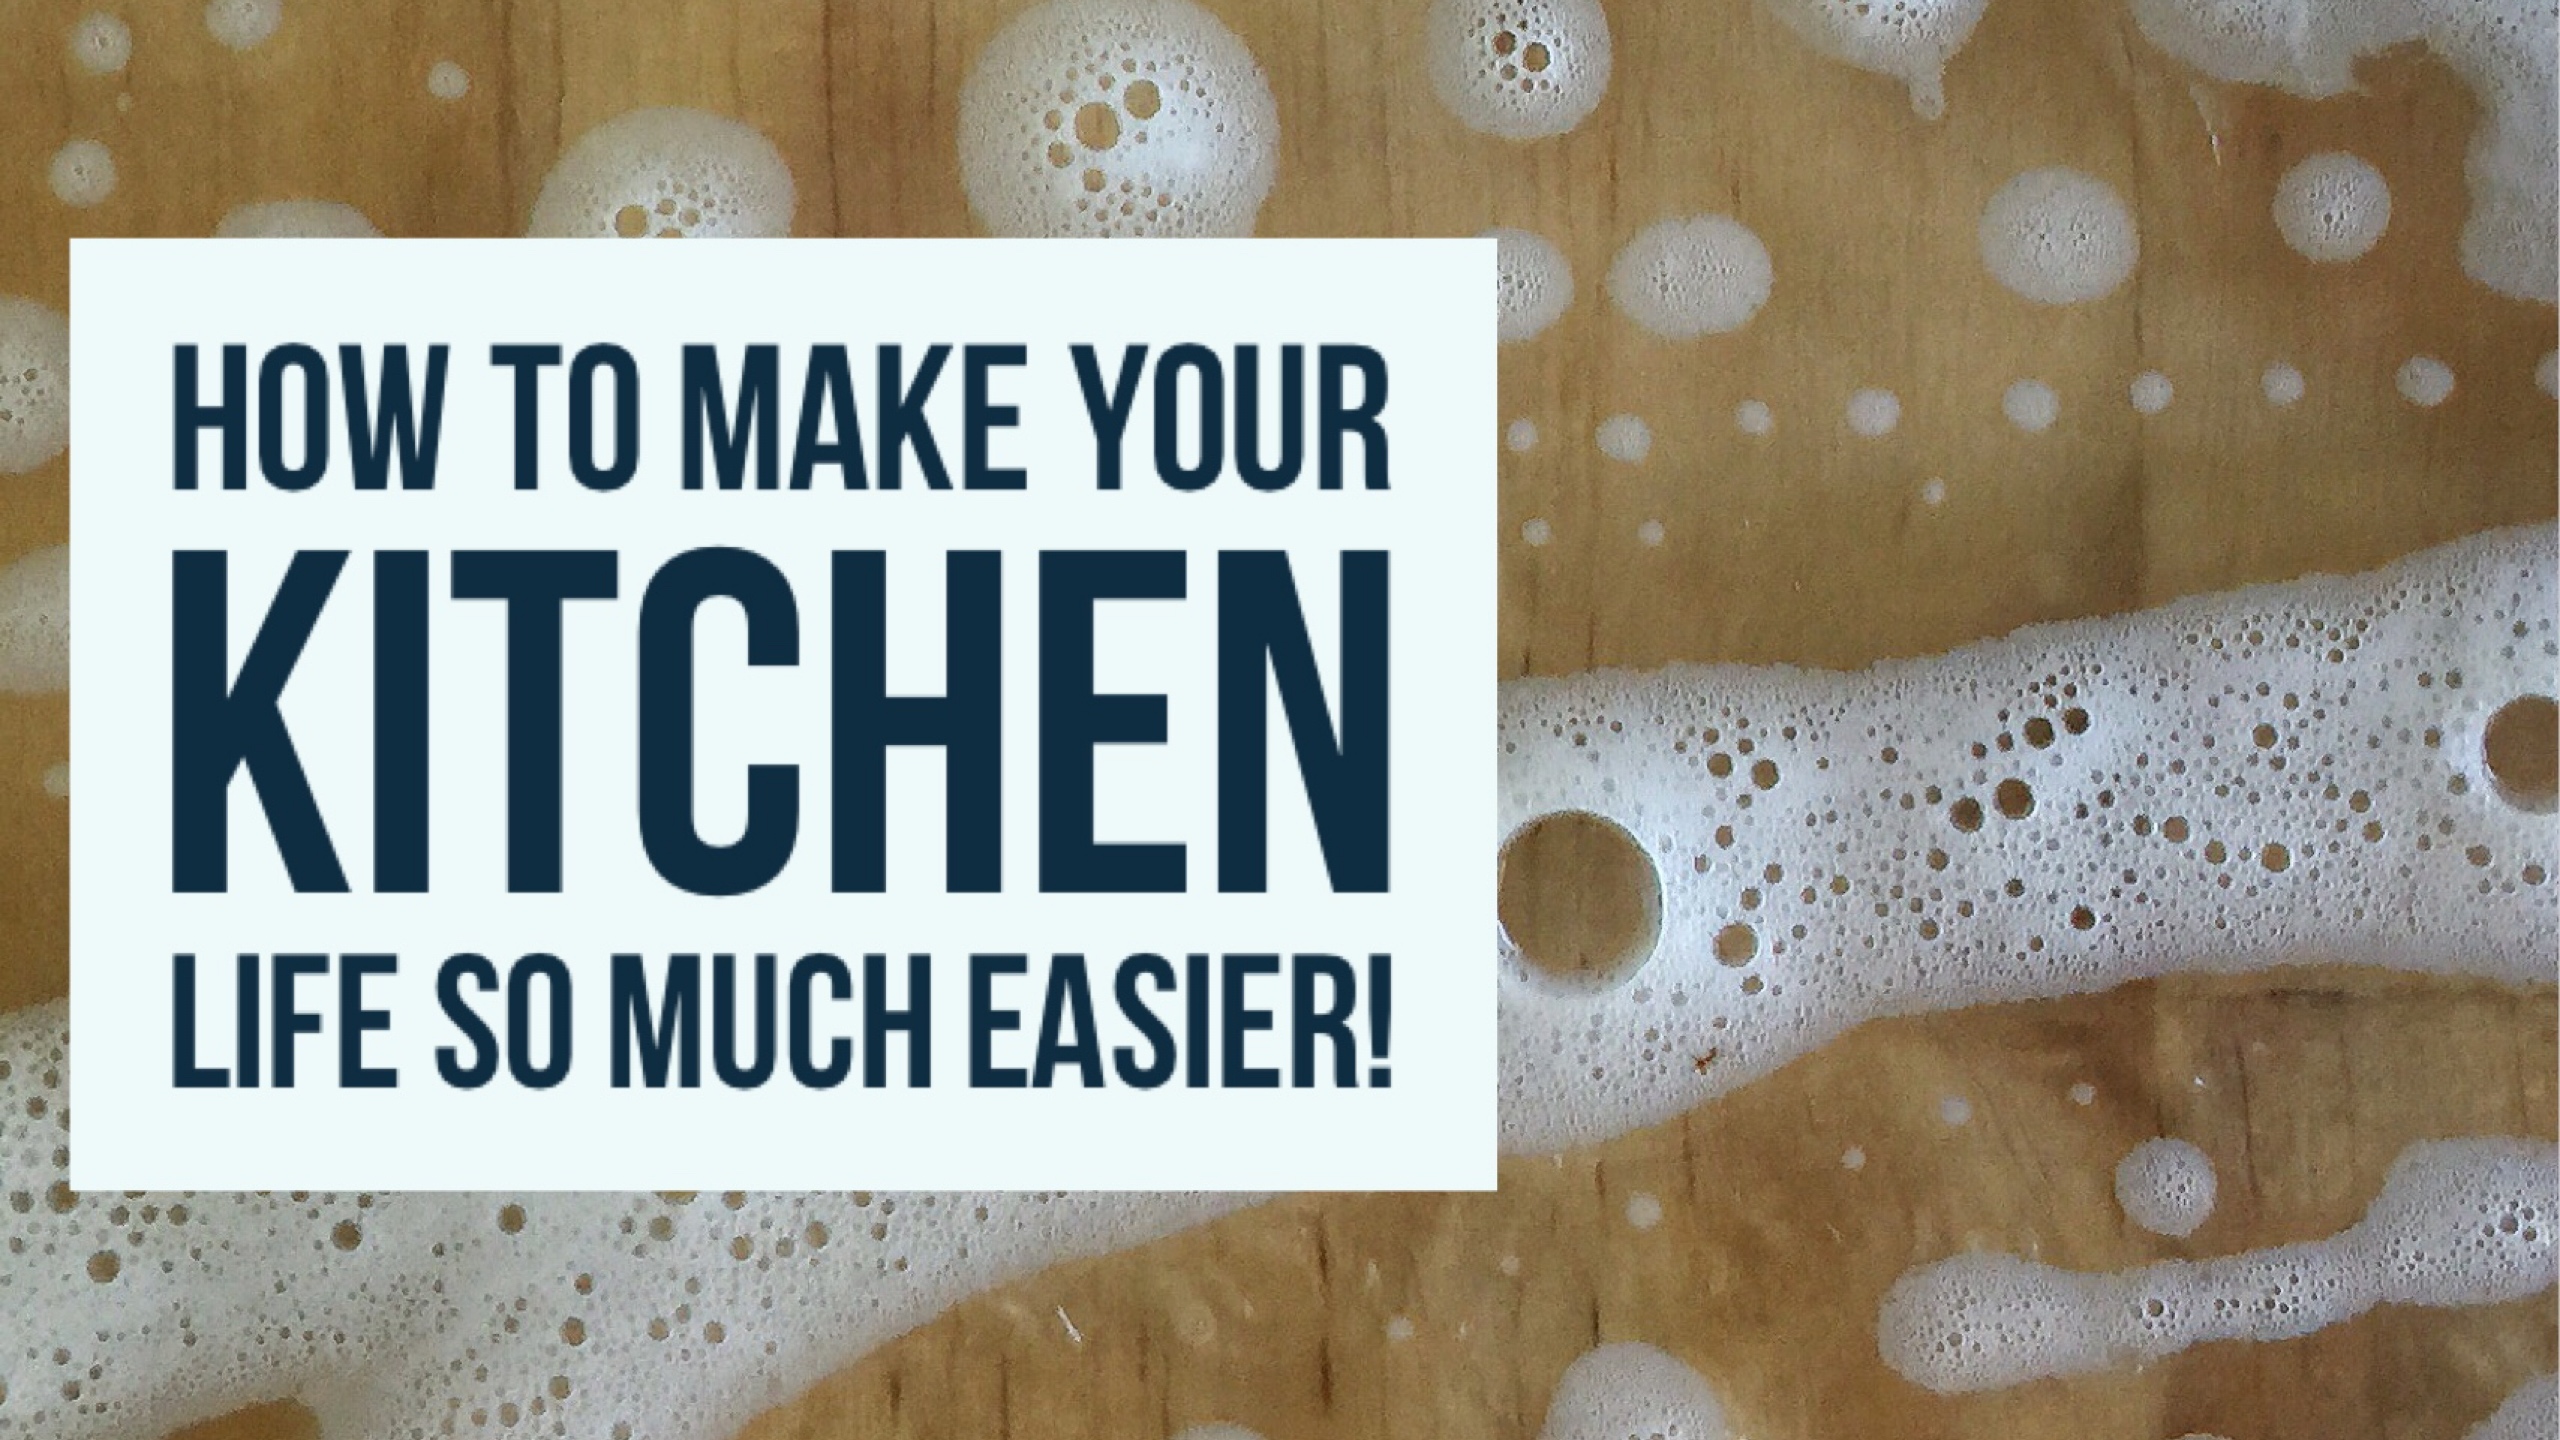 How to make your kitchen life so much easier! © www.roastedbeanz.com #PowerfulFusionClean [AD] #CollectiveBias #shop